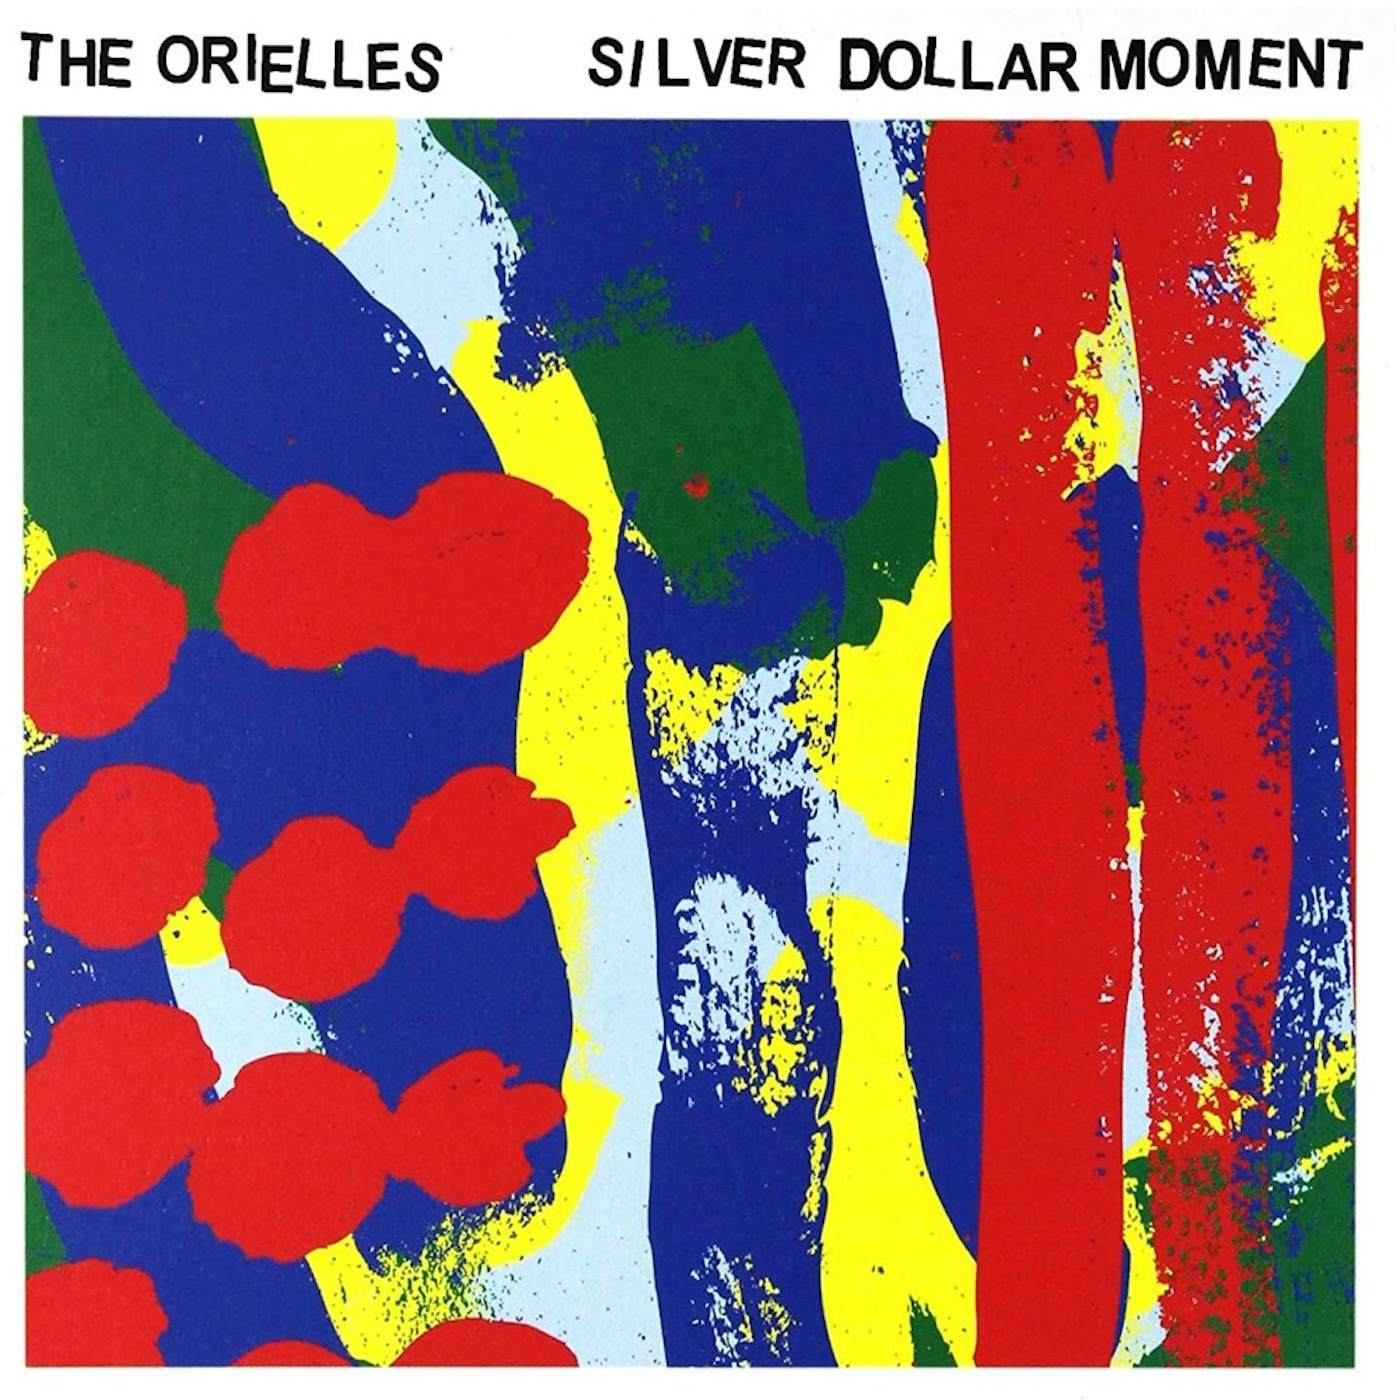 The Orielles Silver Dollar Moment CD